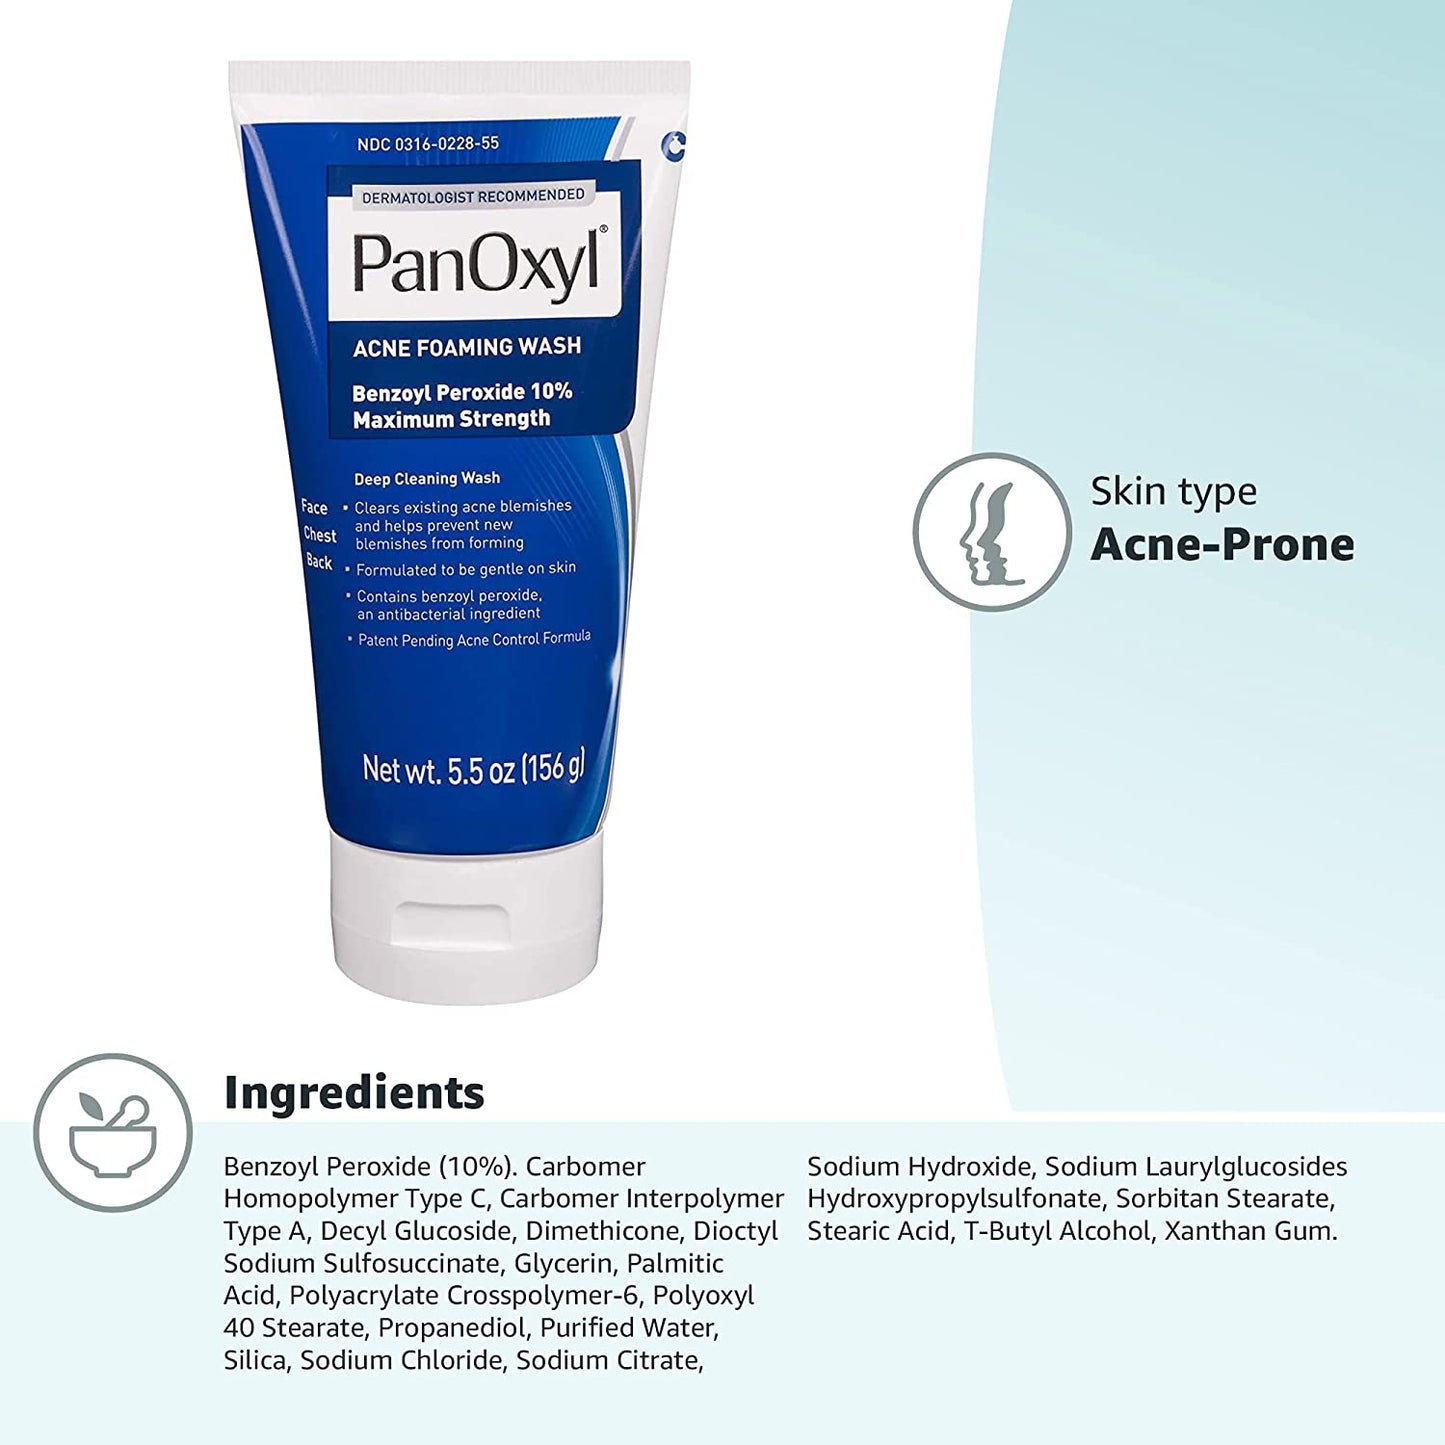 PANOXYL | ACNE FOAMING WASH